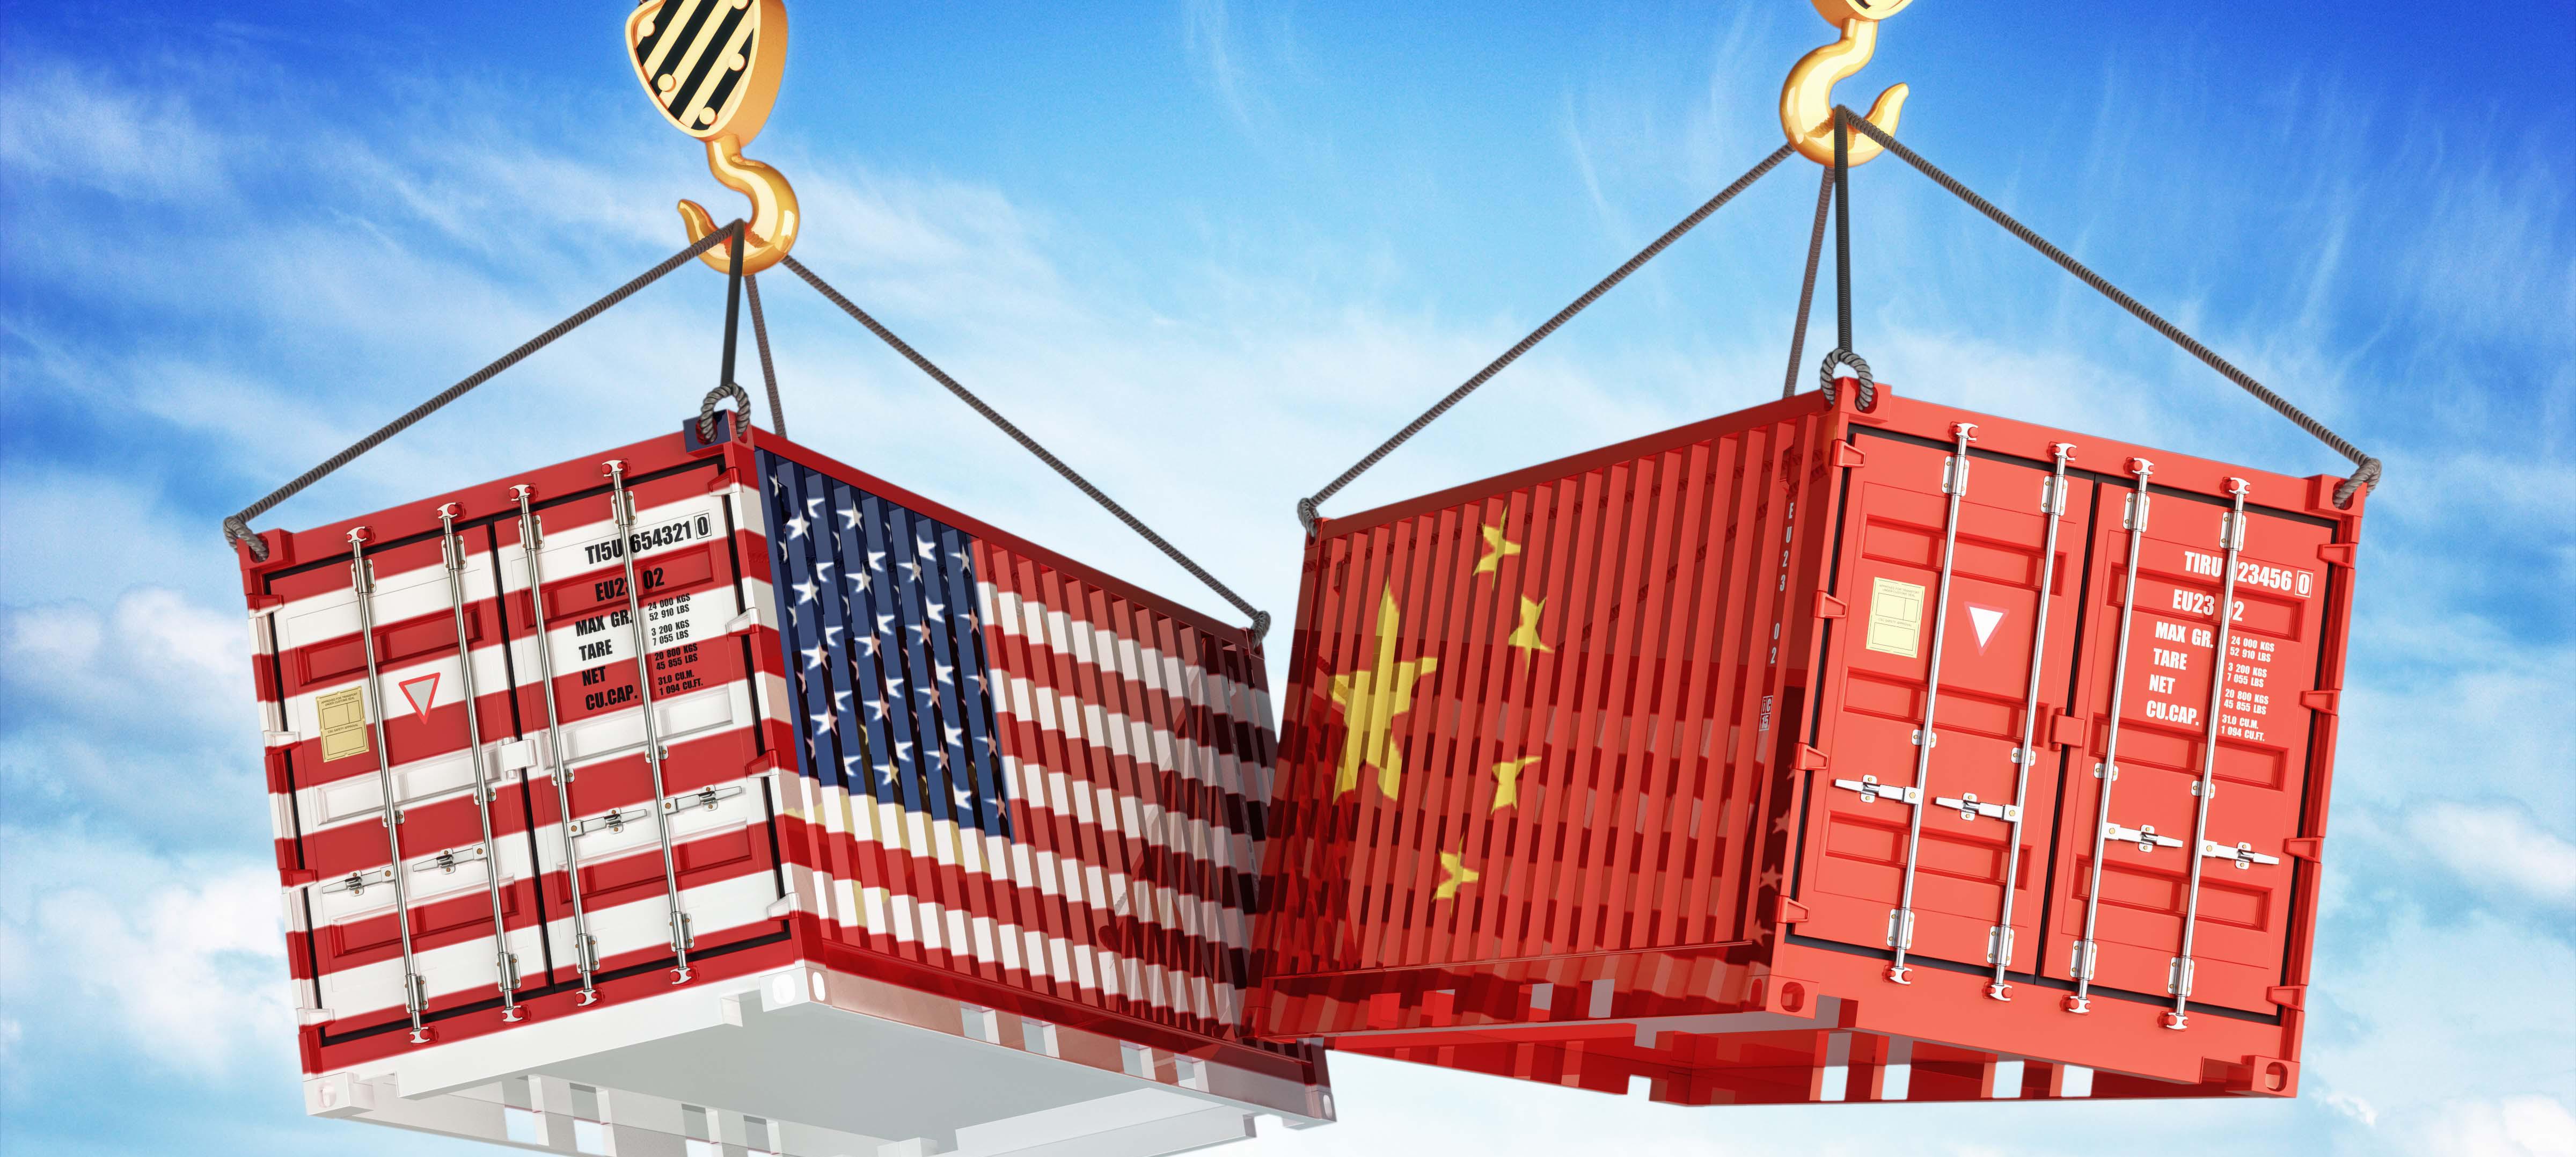 Shipping containers painted like the U.S. and China flags